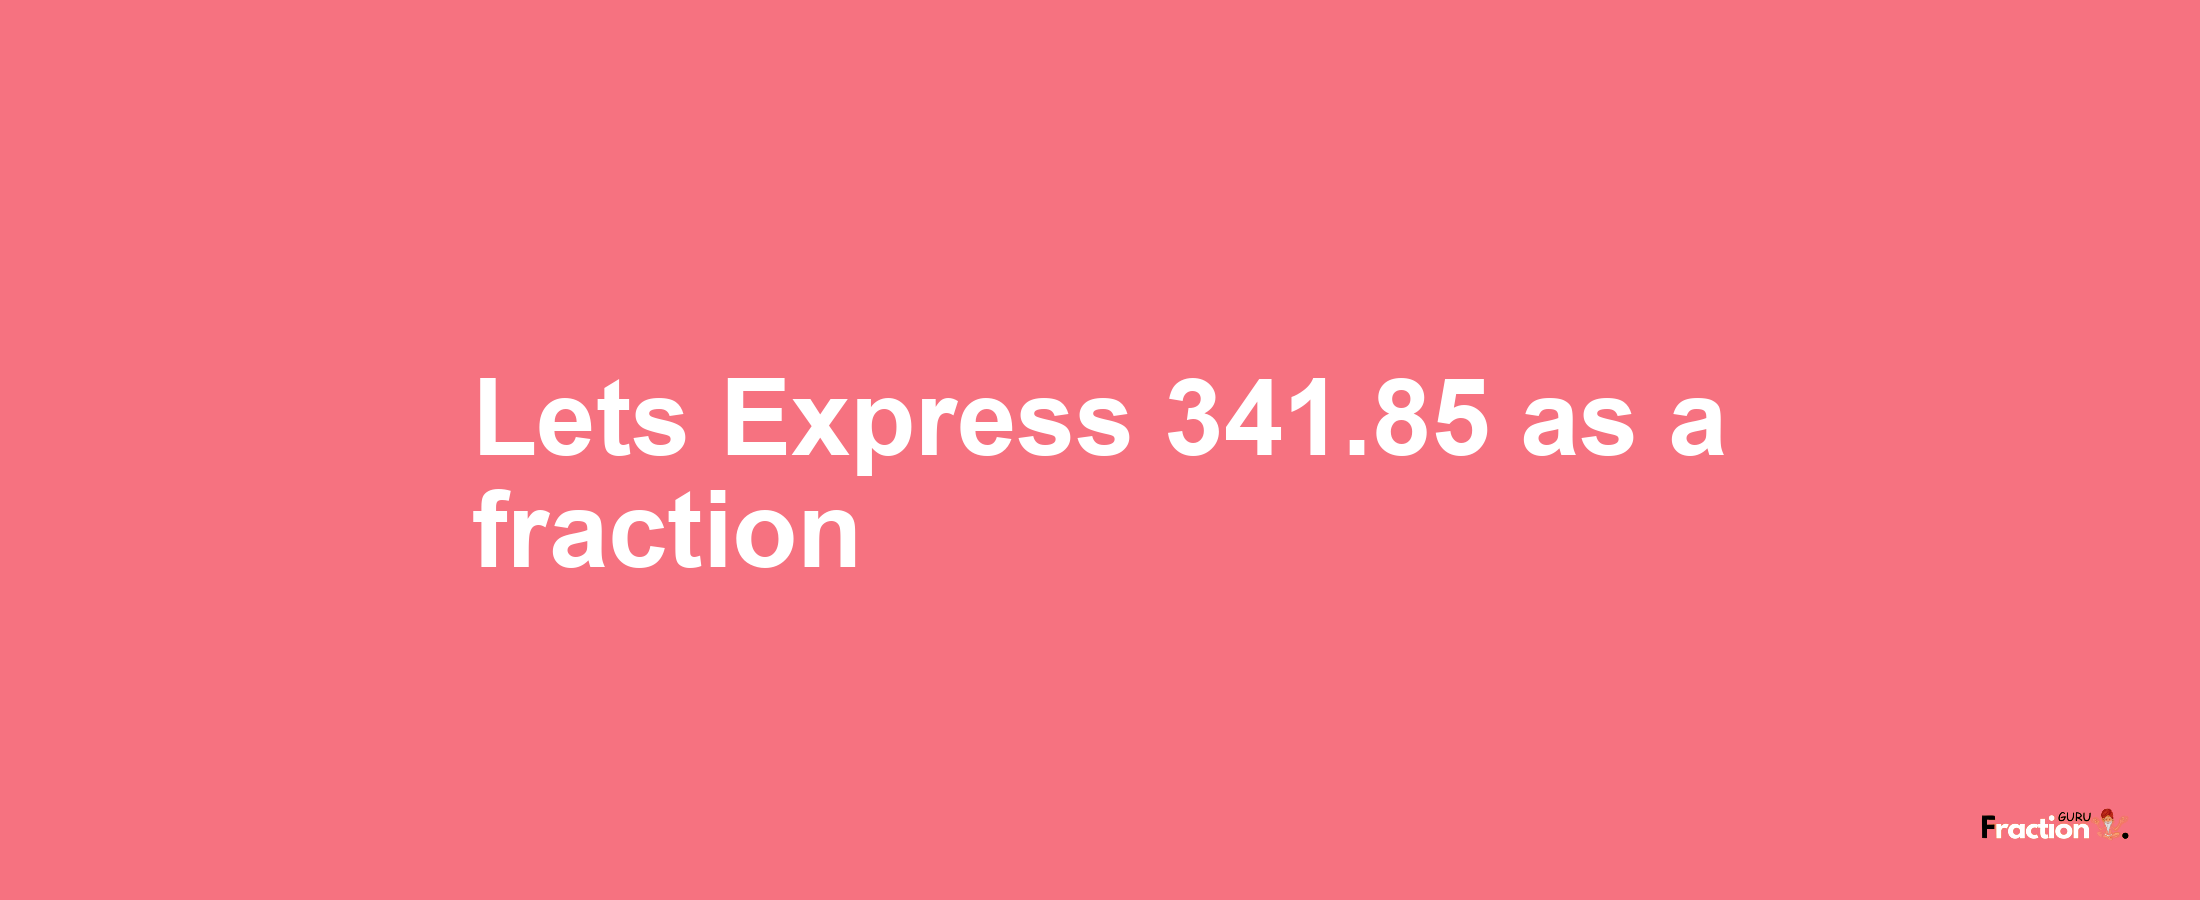 Lets Express 341.85 as afraction